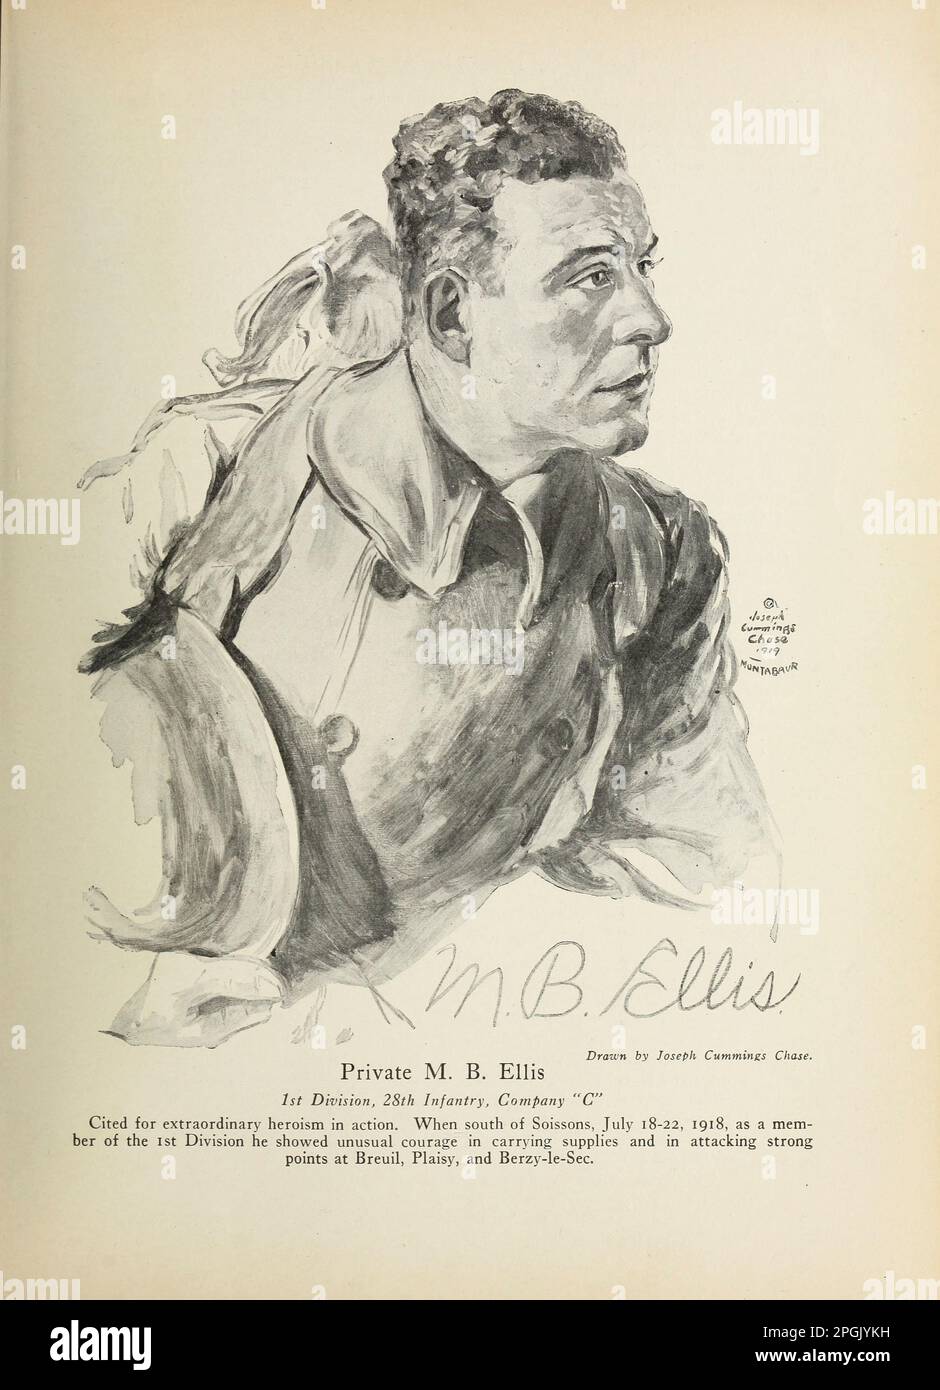 Private M. B. Ellis 1st Division, 28th Infantry, Company 'C' Cited for extraordinary heroism in action. When south of Soissons, July 18-22, 1918, as a member of the 1st Division he showed unusual courage in carrying supplies and in attacking strong points at Breuil, Plaisy, and Berzy-le-Sec from the book ' Deeds of heroism and bravery : the book of heroes and personal daring ' by Elwyn Alfred Barron and Rupert Hughes,  Publication Date 1920 Publisher New York : Harper & Brothers Publishers Stock Photo